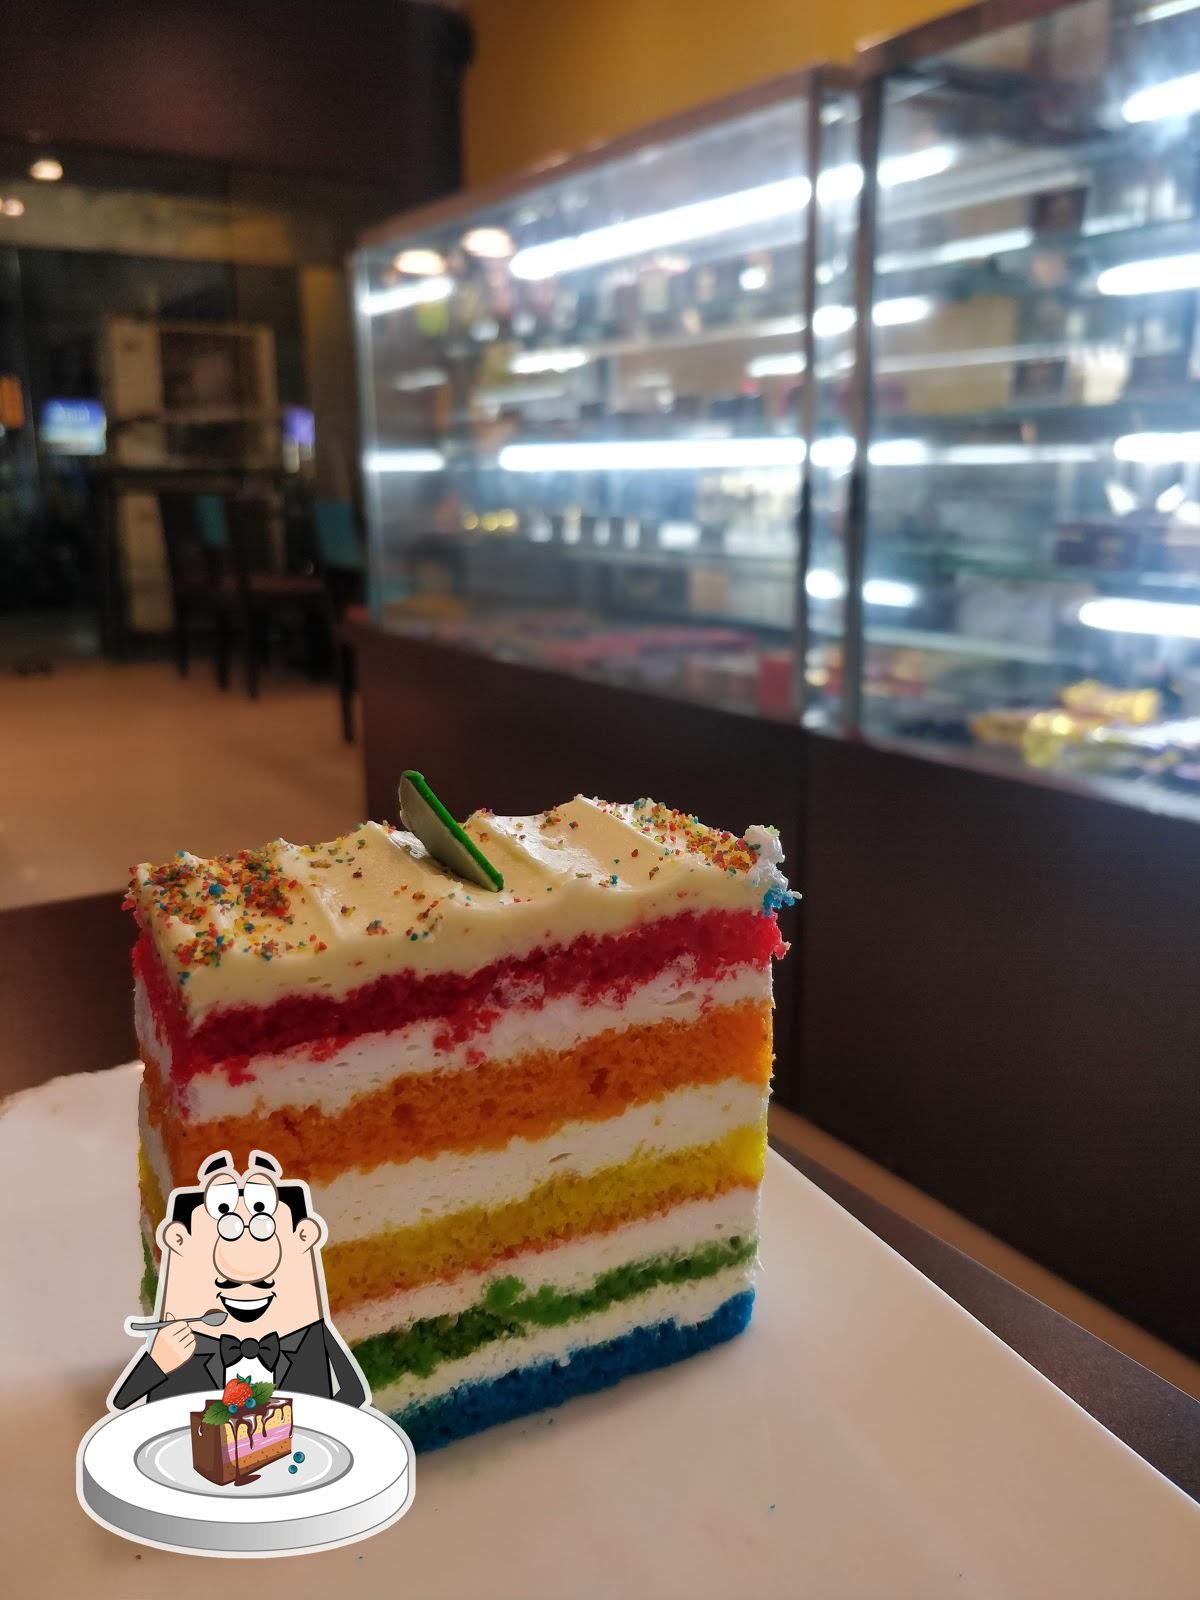 DangeeDums - The Rainbow Cake from Dangee Dums makes every... | Facebook